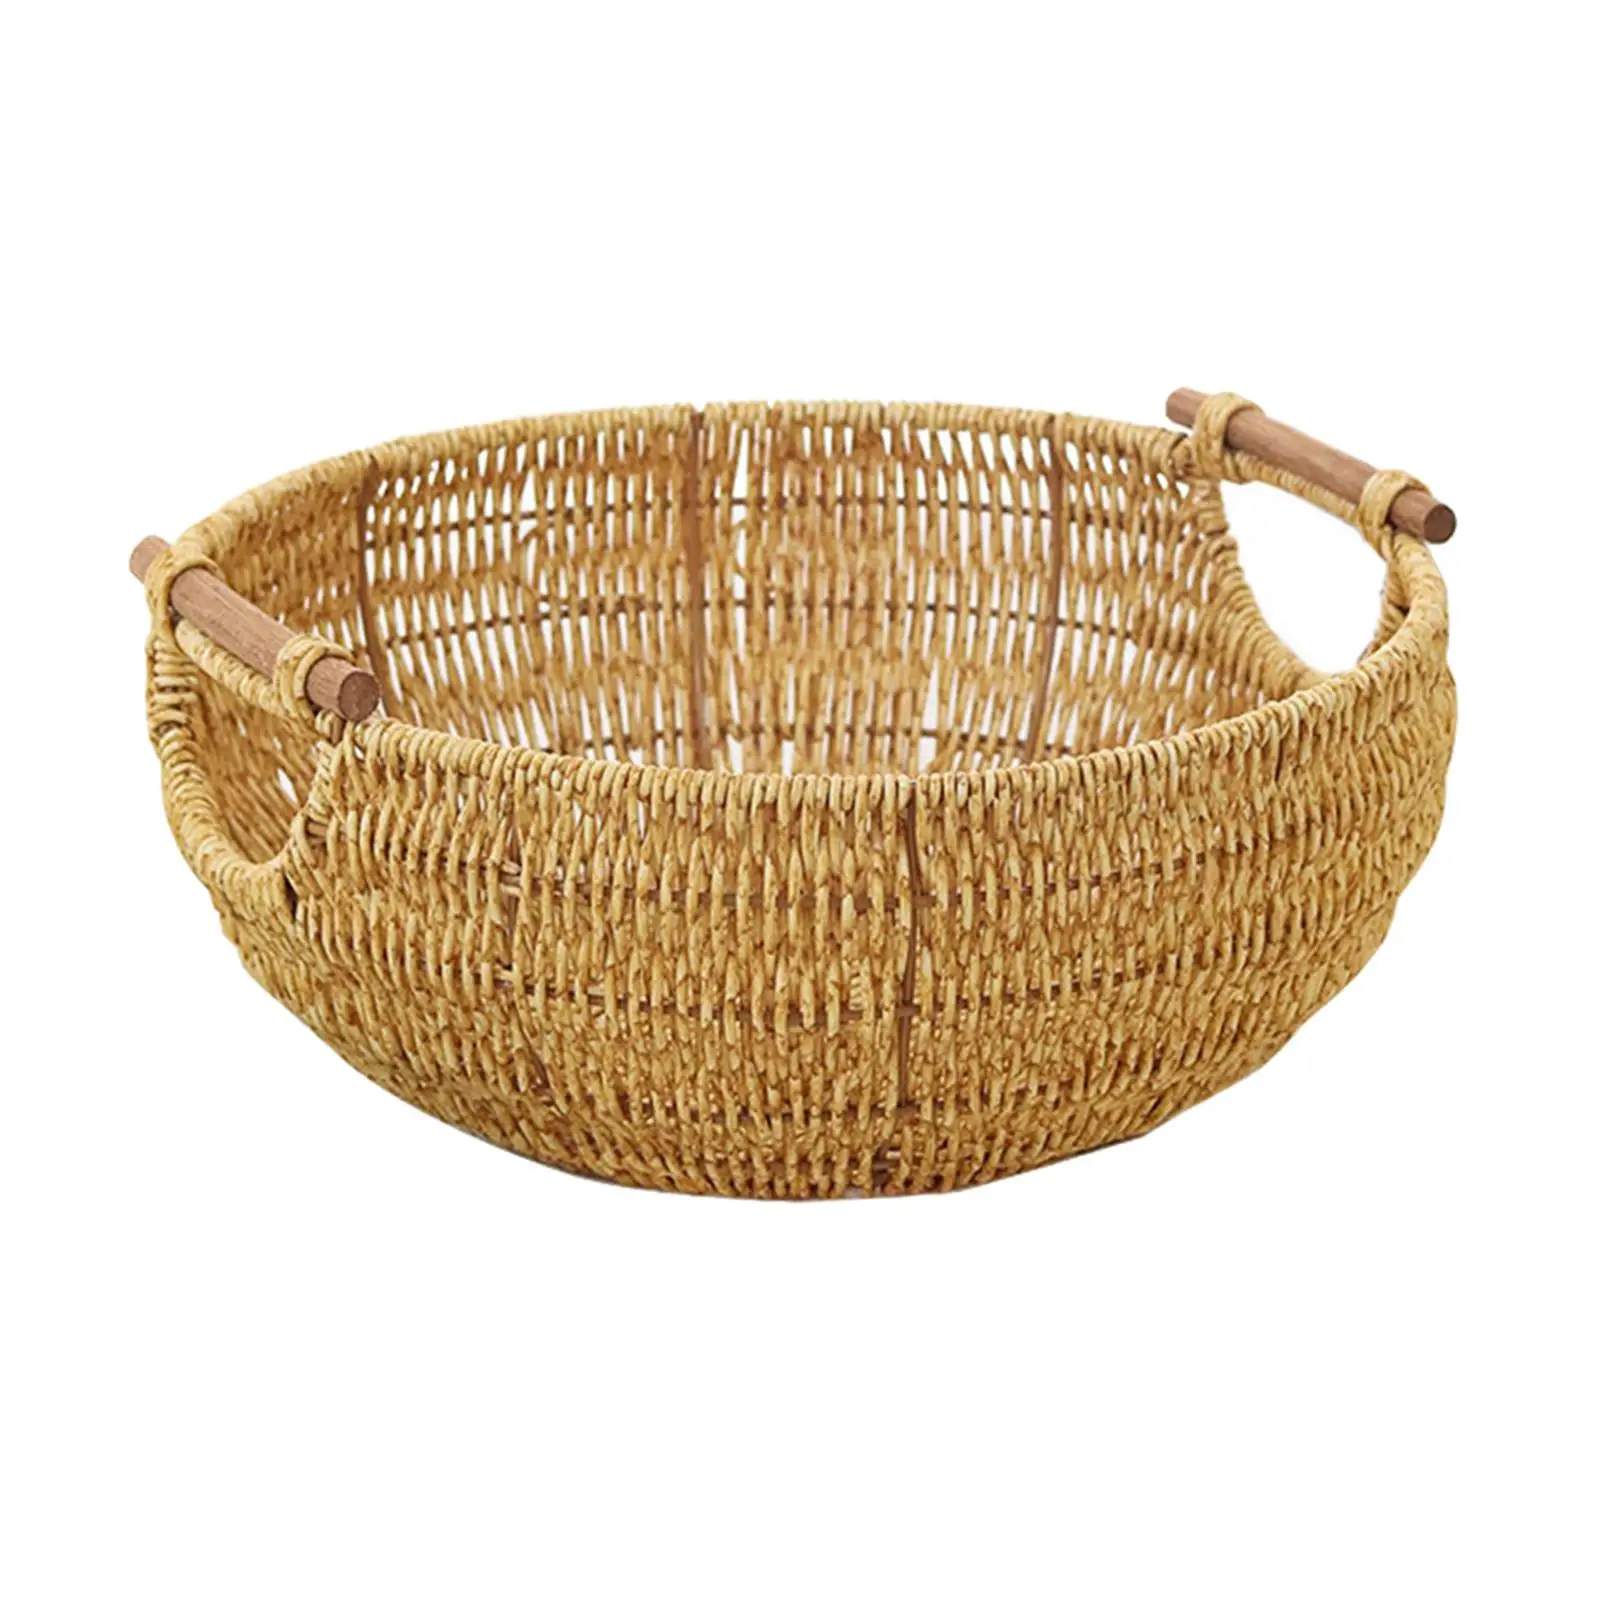 Bread Egg Tray Organizer with Handle Sundries Organizer Basket Portable Woven Basket for Home Living Room Kitchen Bedroom